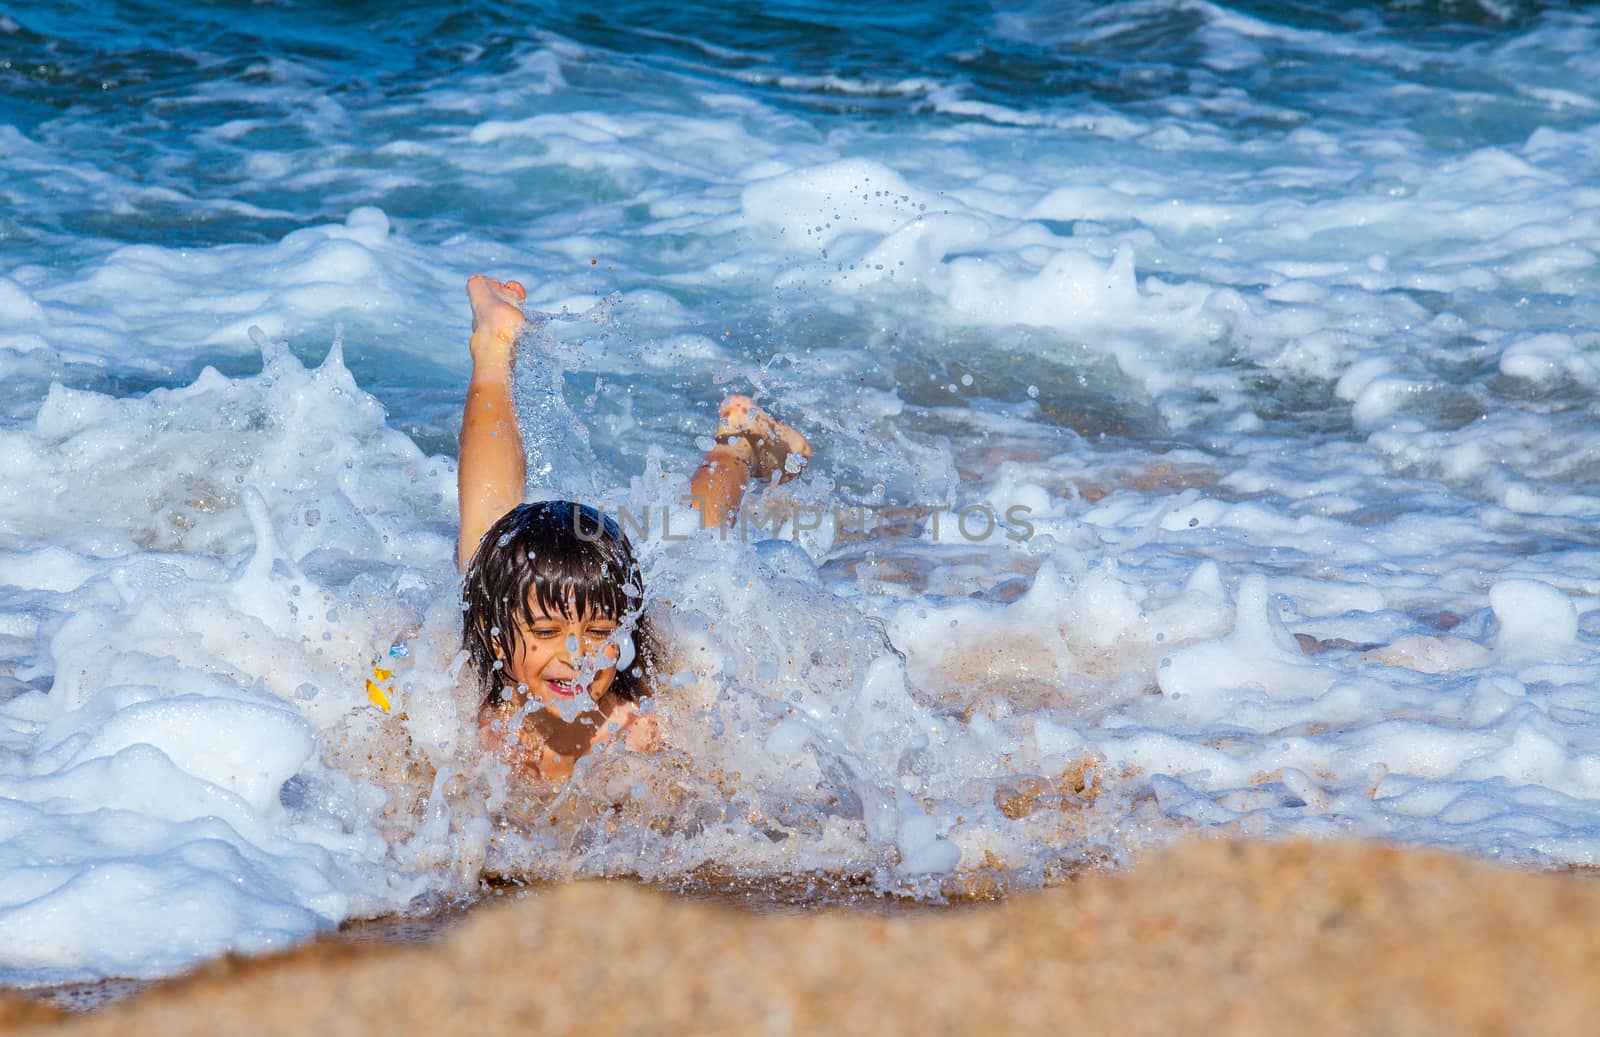 Little boy laughing in the foam of waves at sea by Astroid